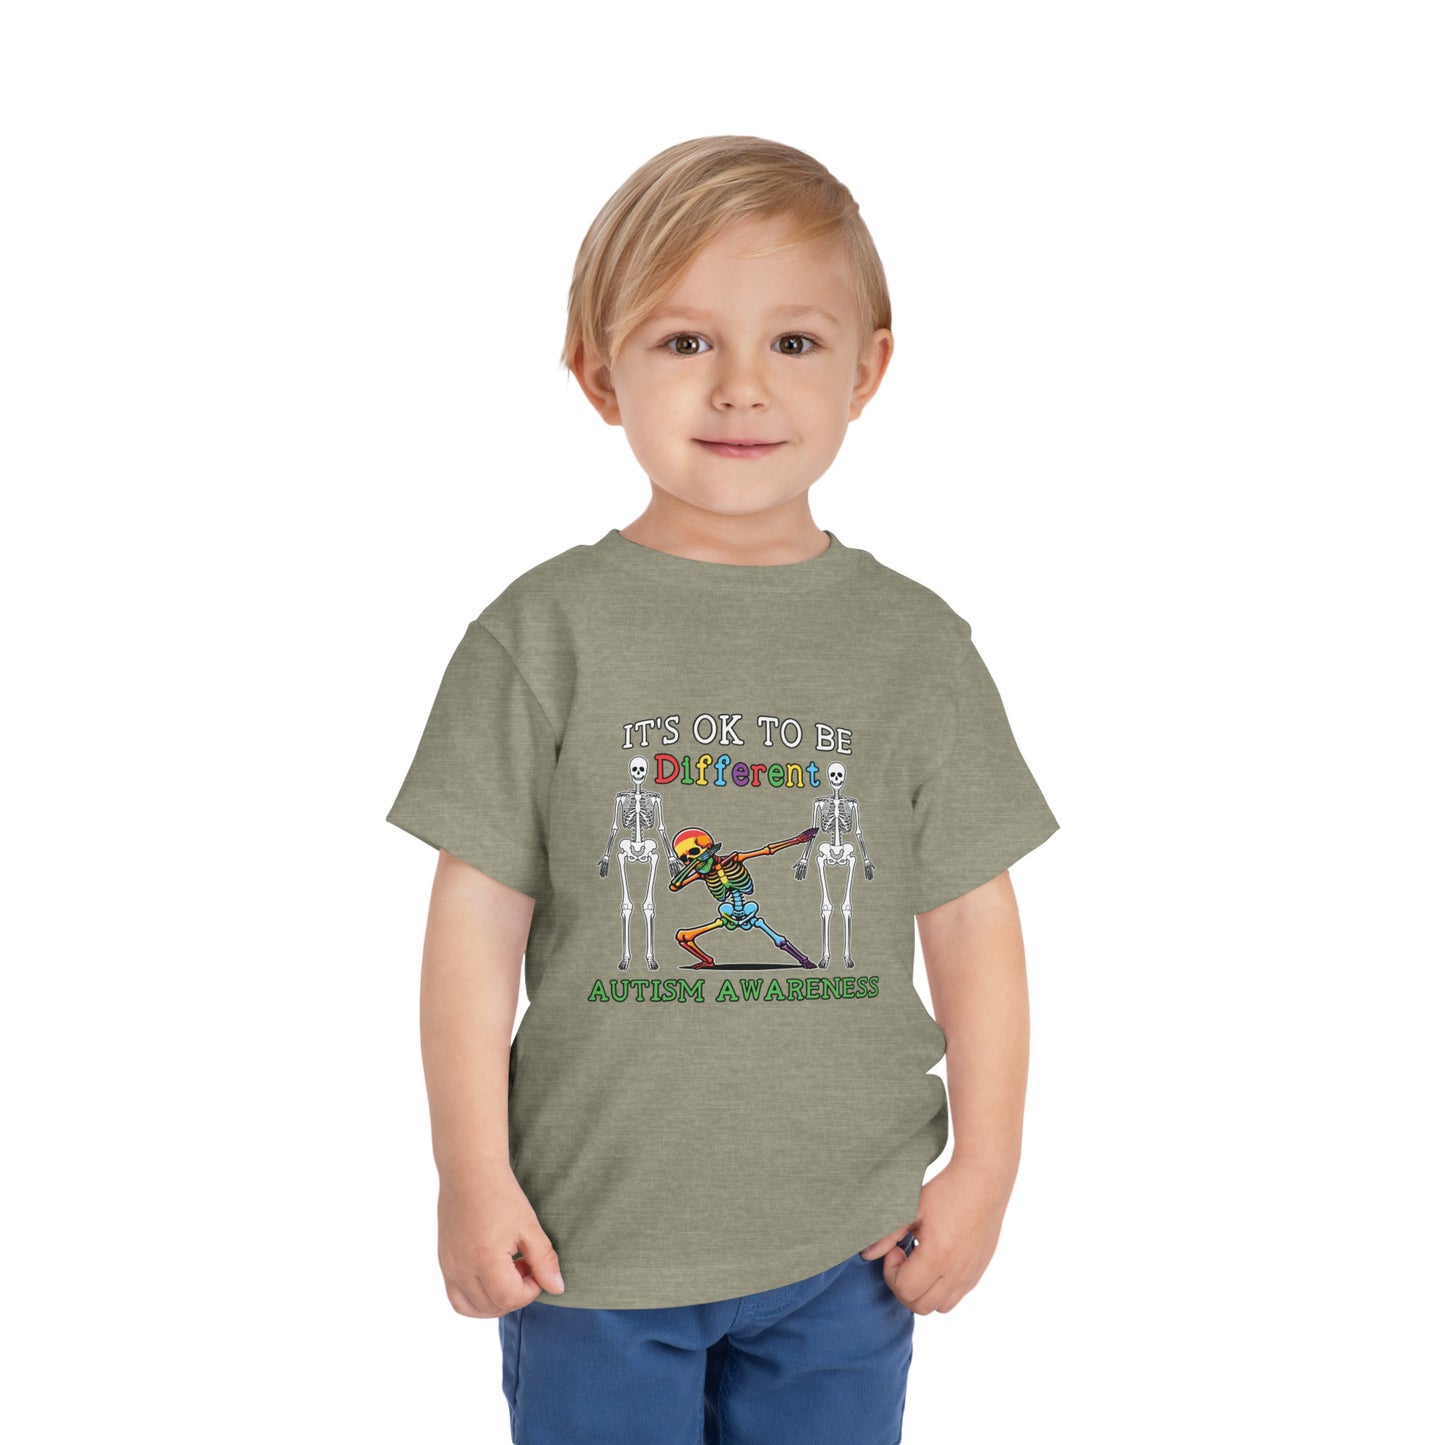 It's Okay to be different Autism Awareness Advocate Toddler Short Sleeve Tee